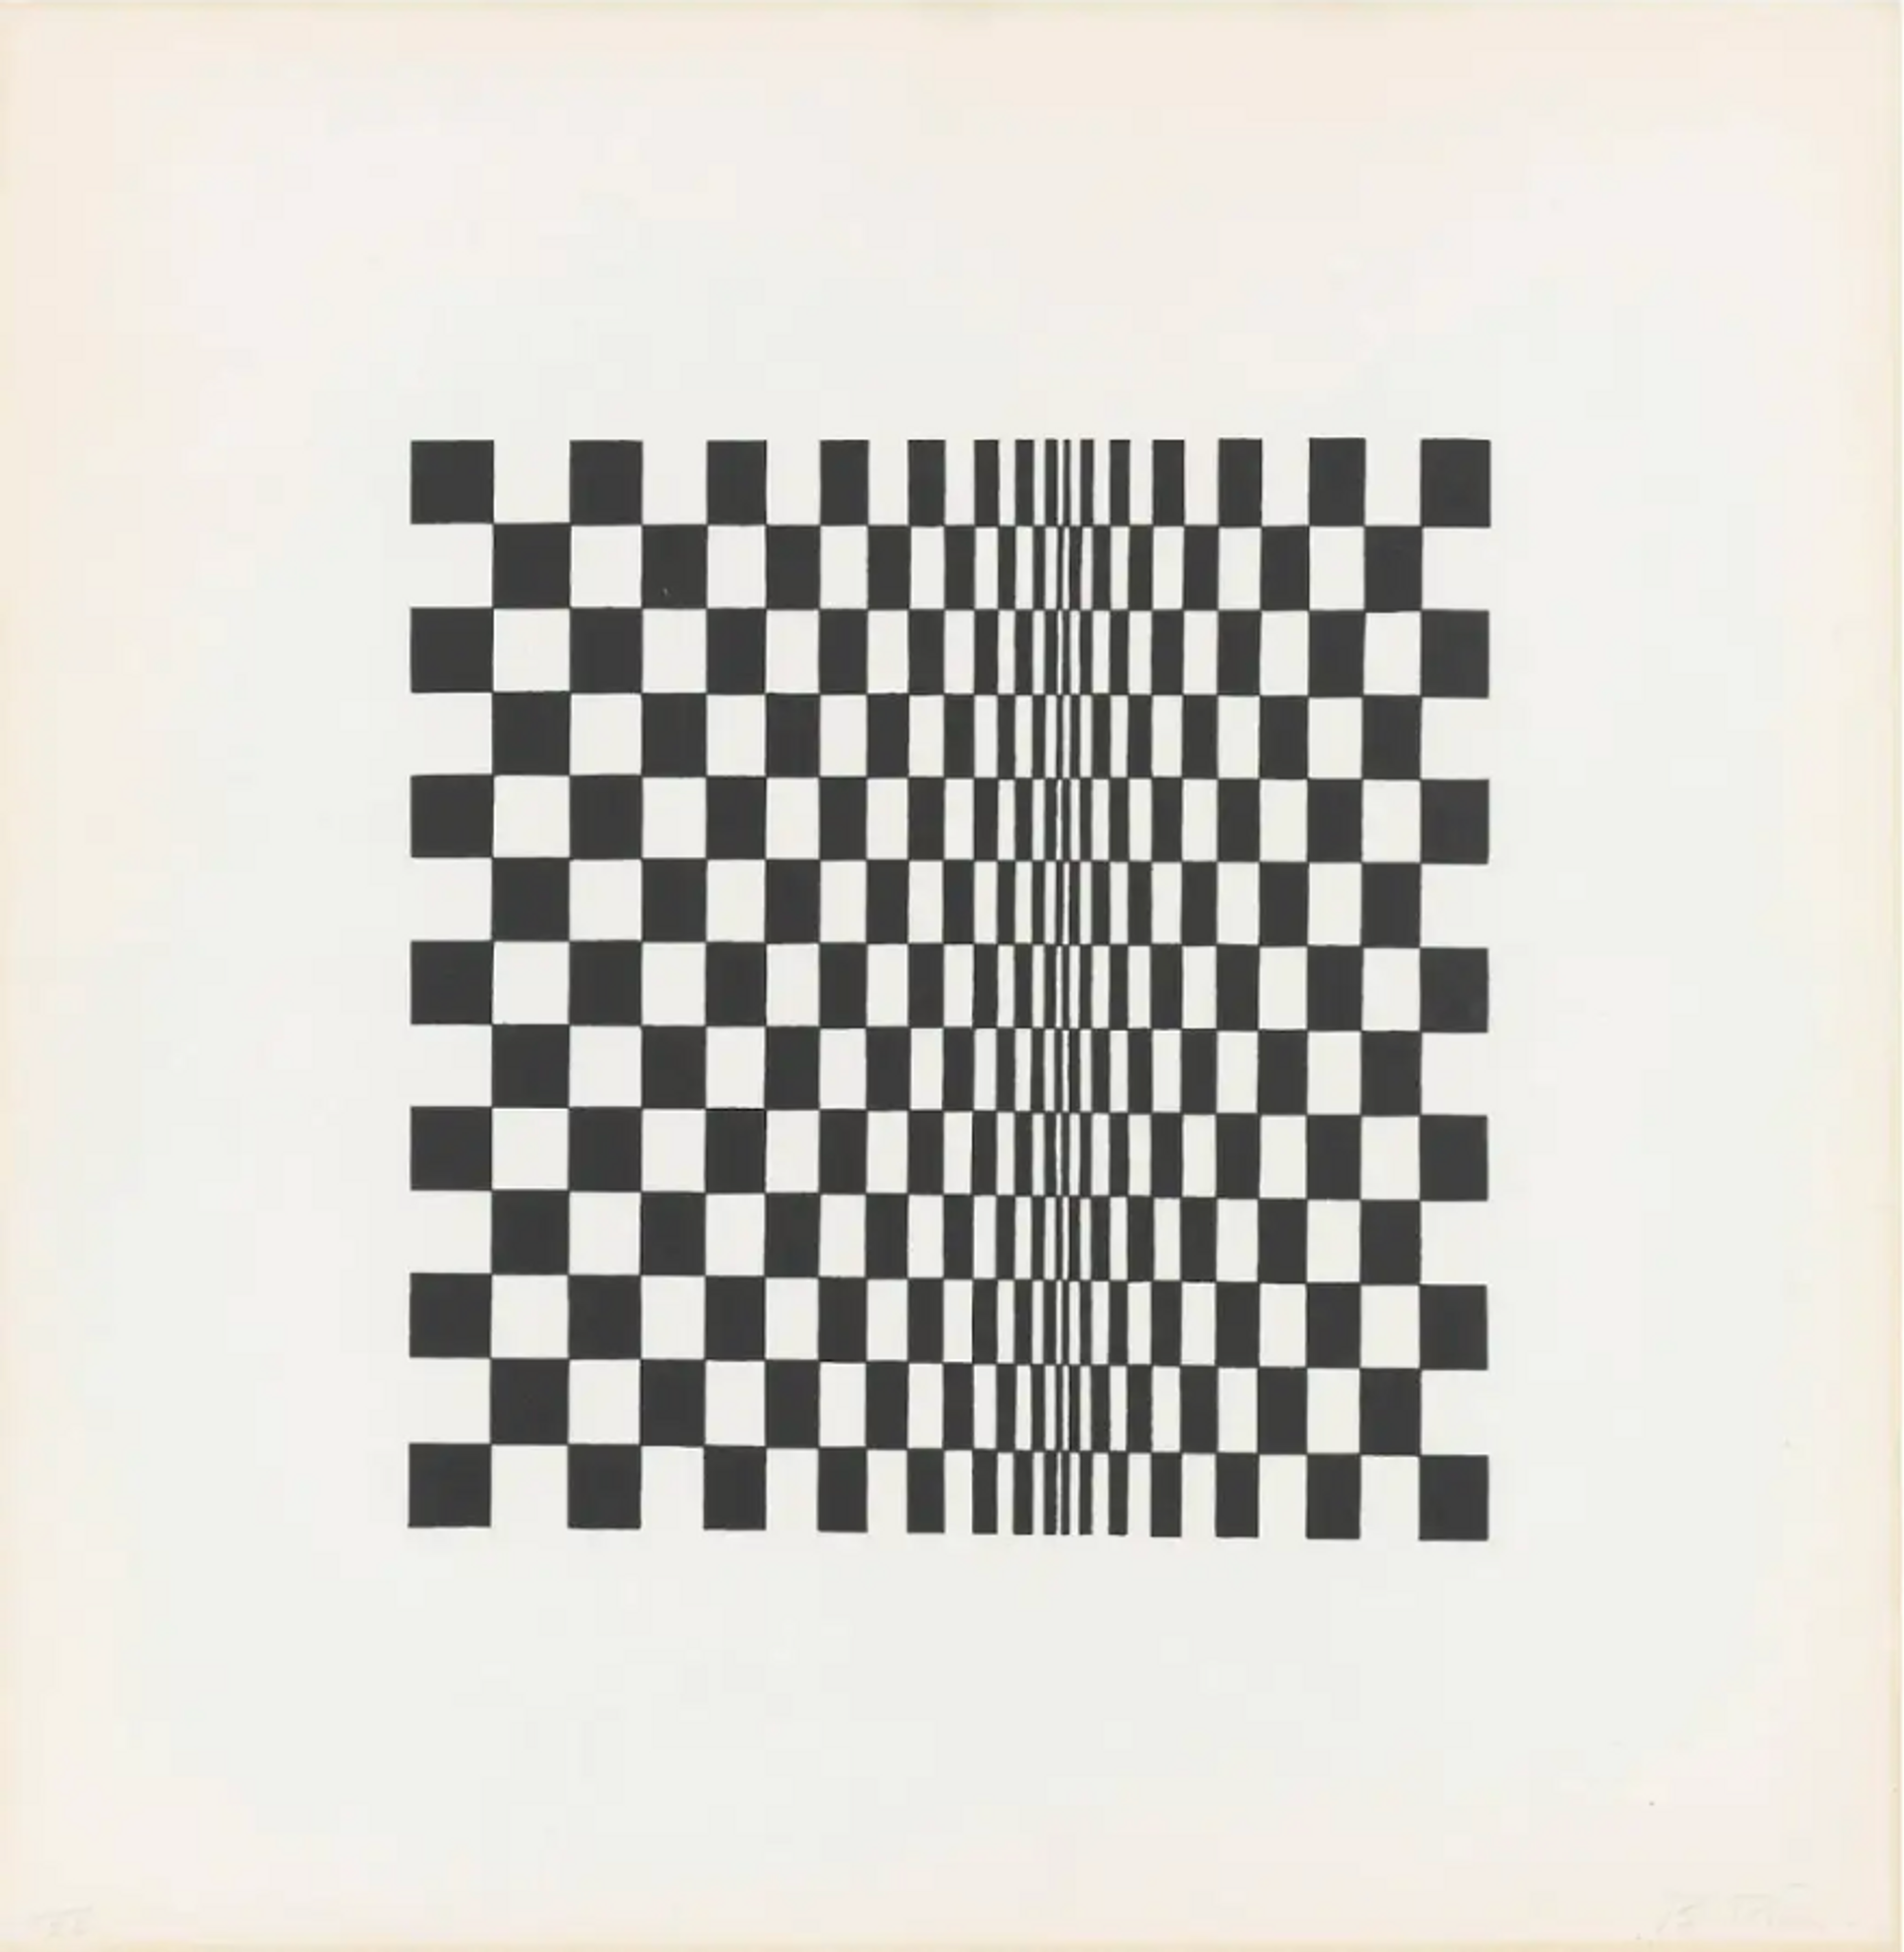 Untitled (Based On Movement In Squares) by Bridget Riley